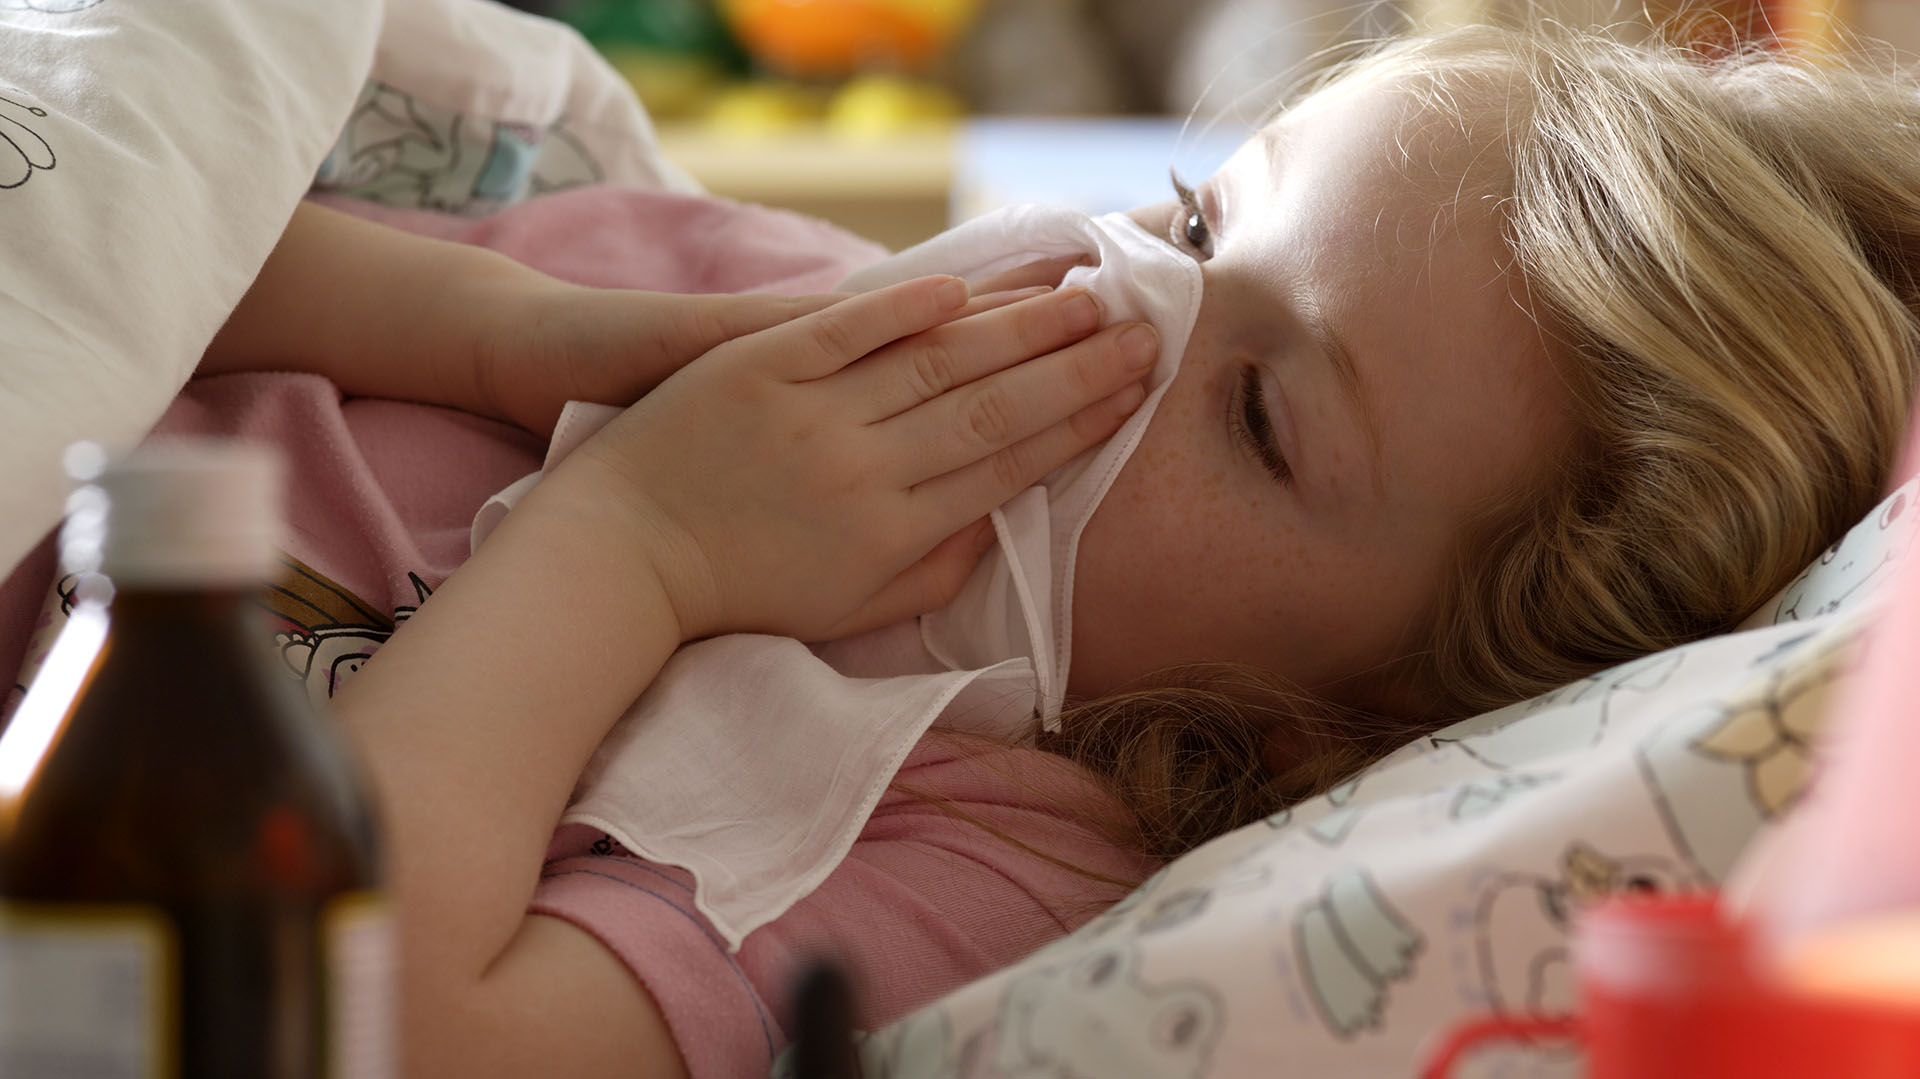 Infants under 3 months of age, premature babies, and those with chronic health problems (such as heart disease, chronic lung disease, or compromised immunity) are at higher risk of severe forms of bronchiolitis (Getty Images)